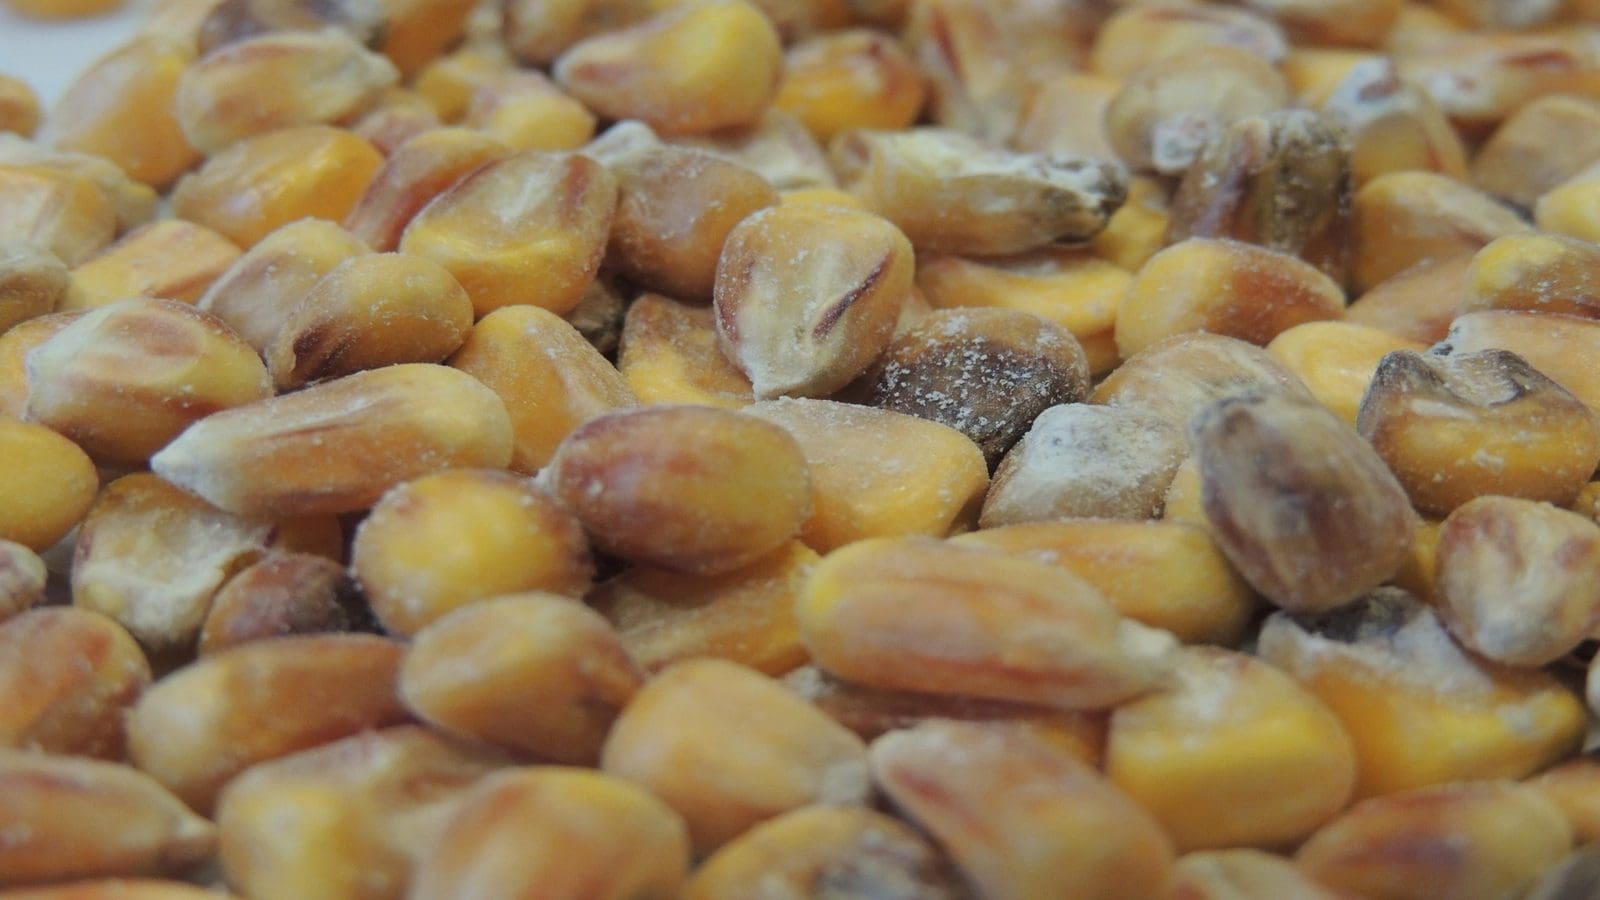 Aflatoxin biocontrol technology sheds light on maize and groundnut farmers in Tanzania